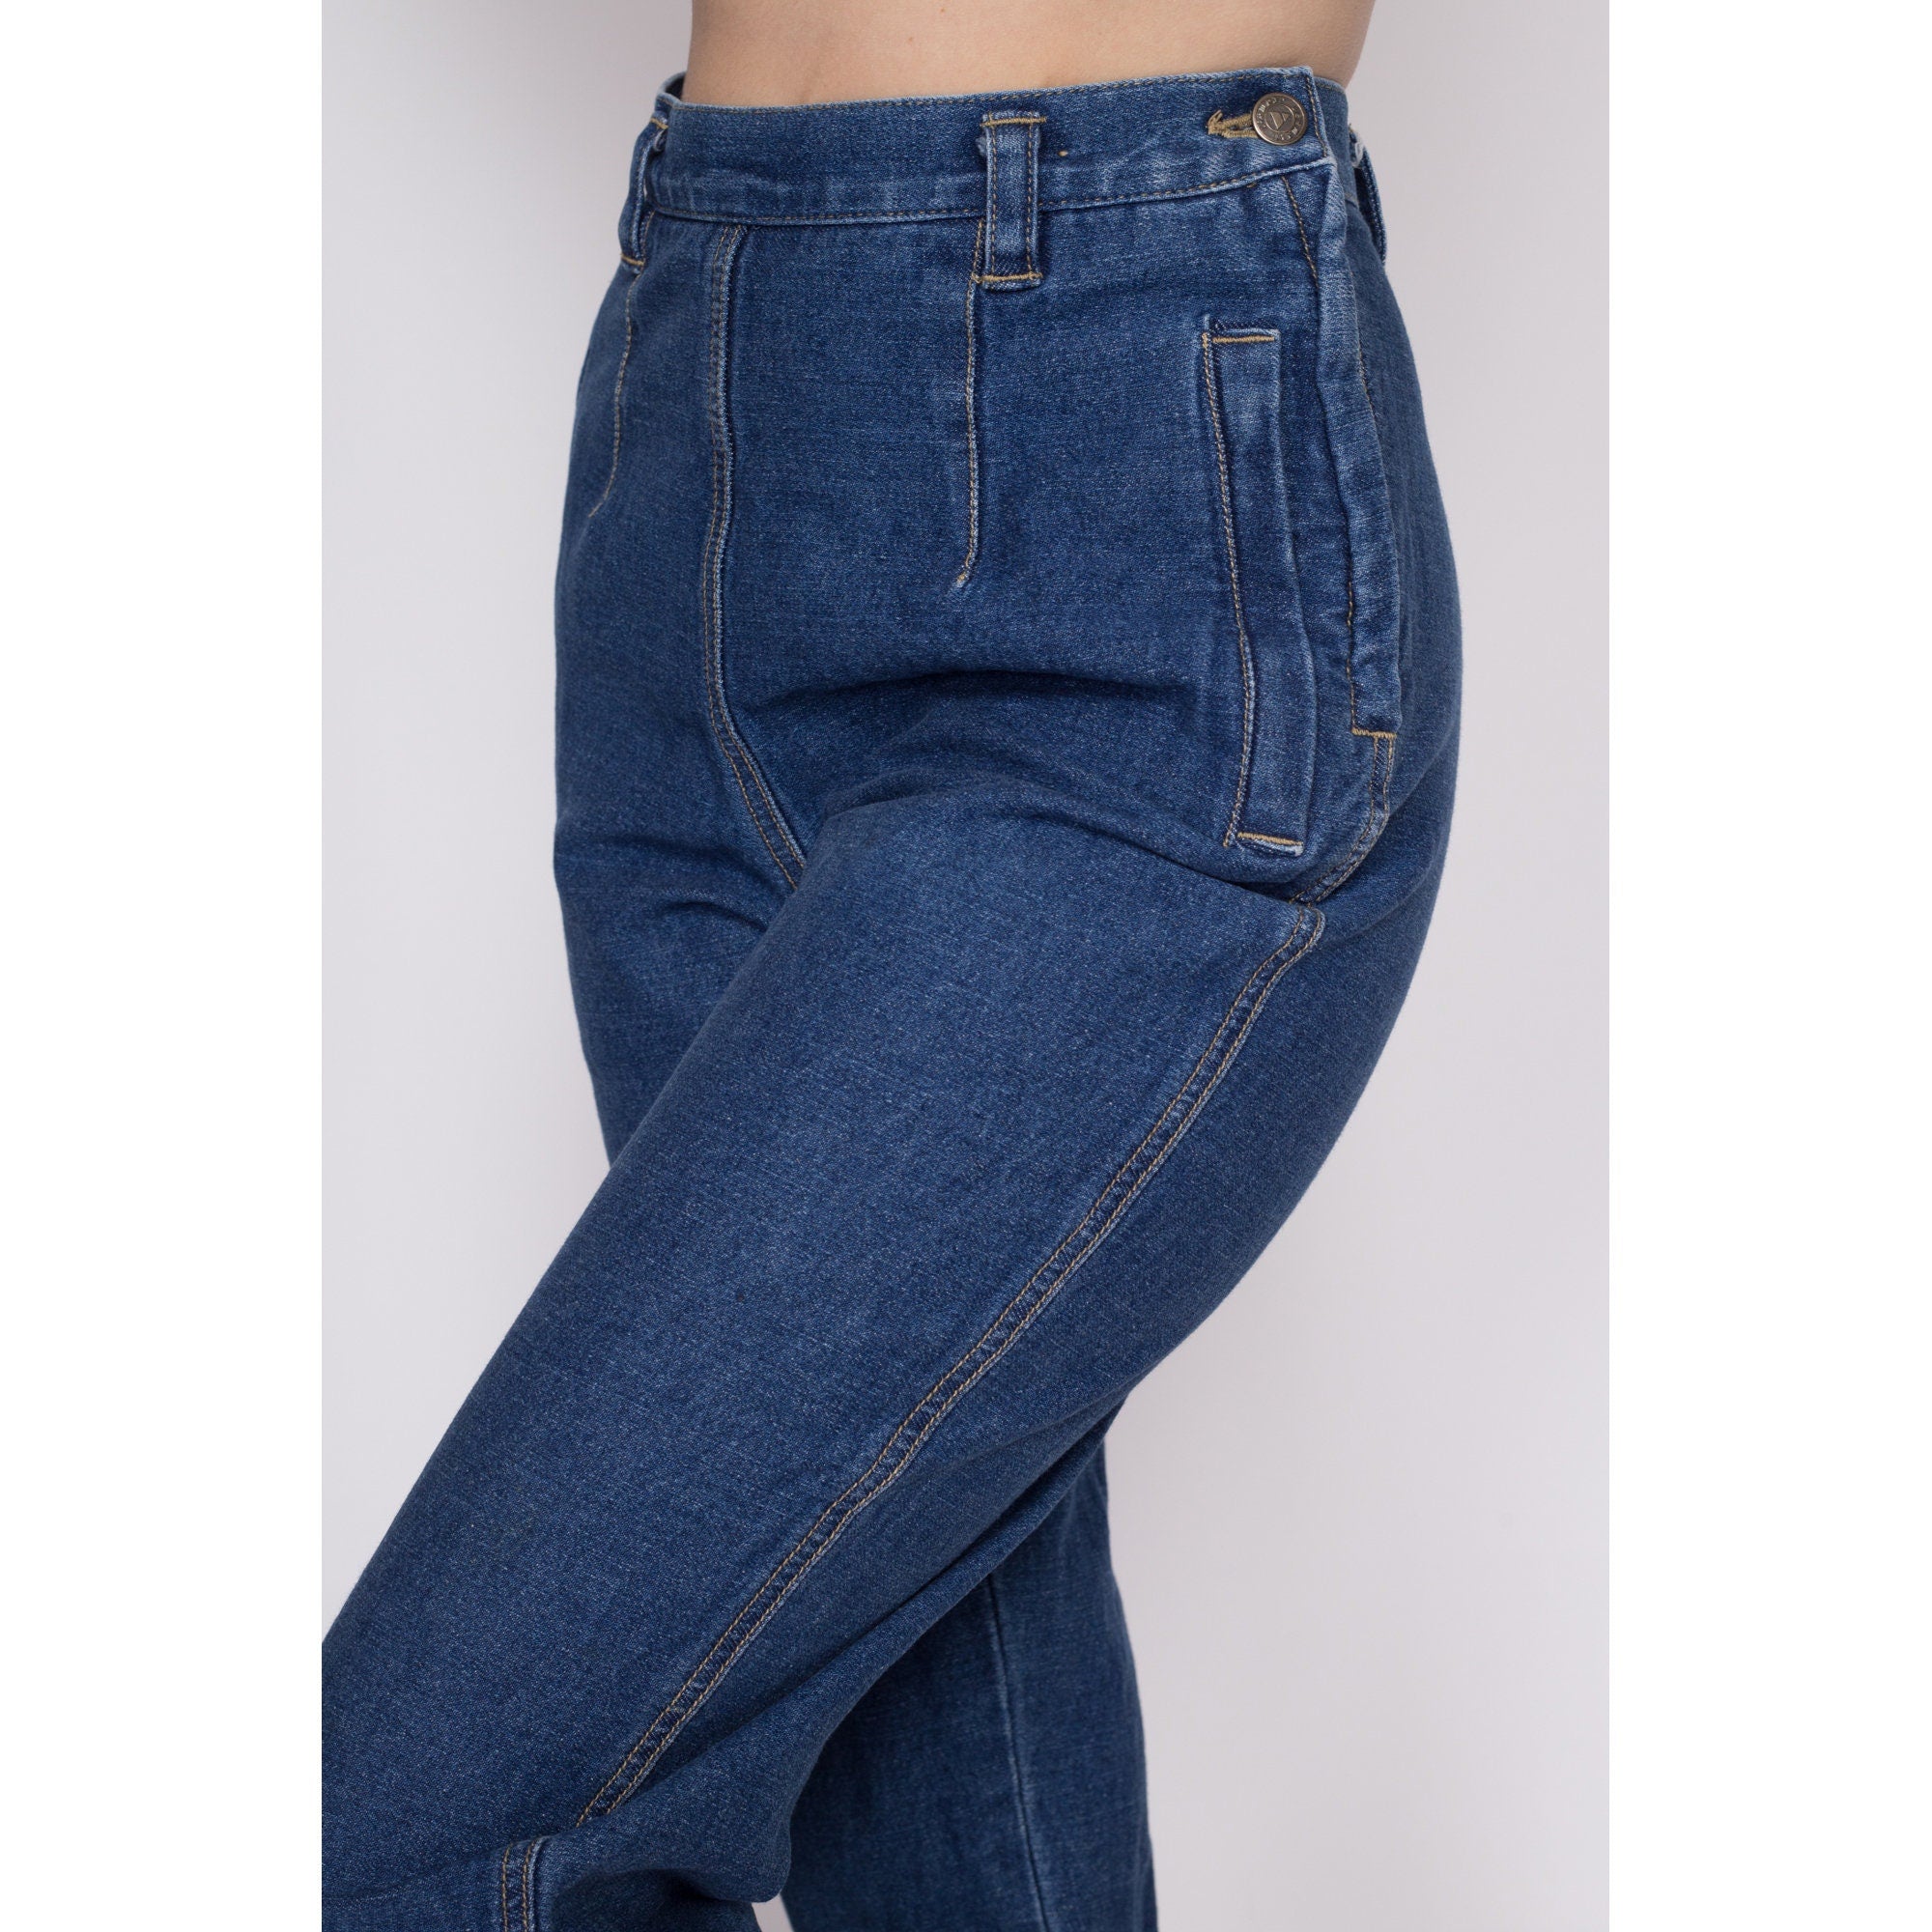 Zip Skinny Grey Site Less Denim Jeans For Women at Rs 350/unit in Ahmedabad  | ID: 21269662412